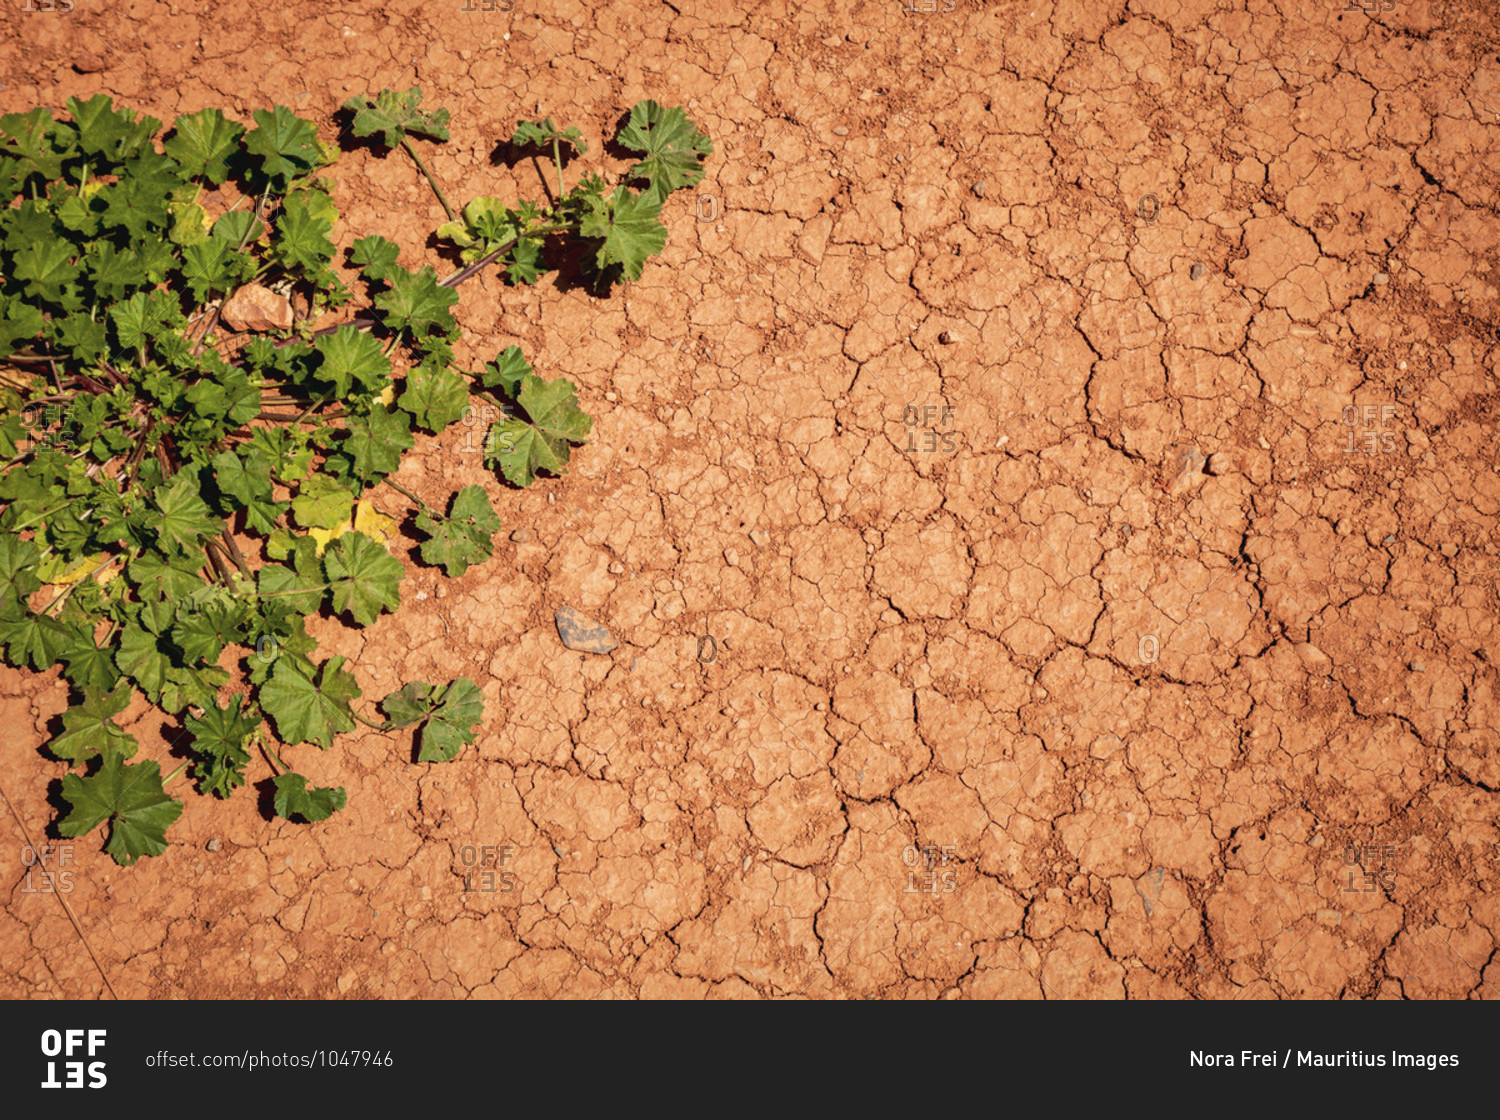 Drought, climate change, plants, nature conservation,
sustainability stock photo - OFFSET